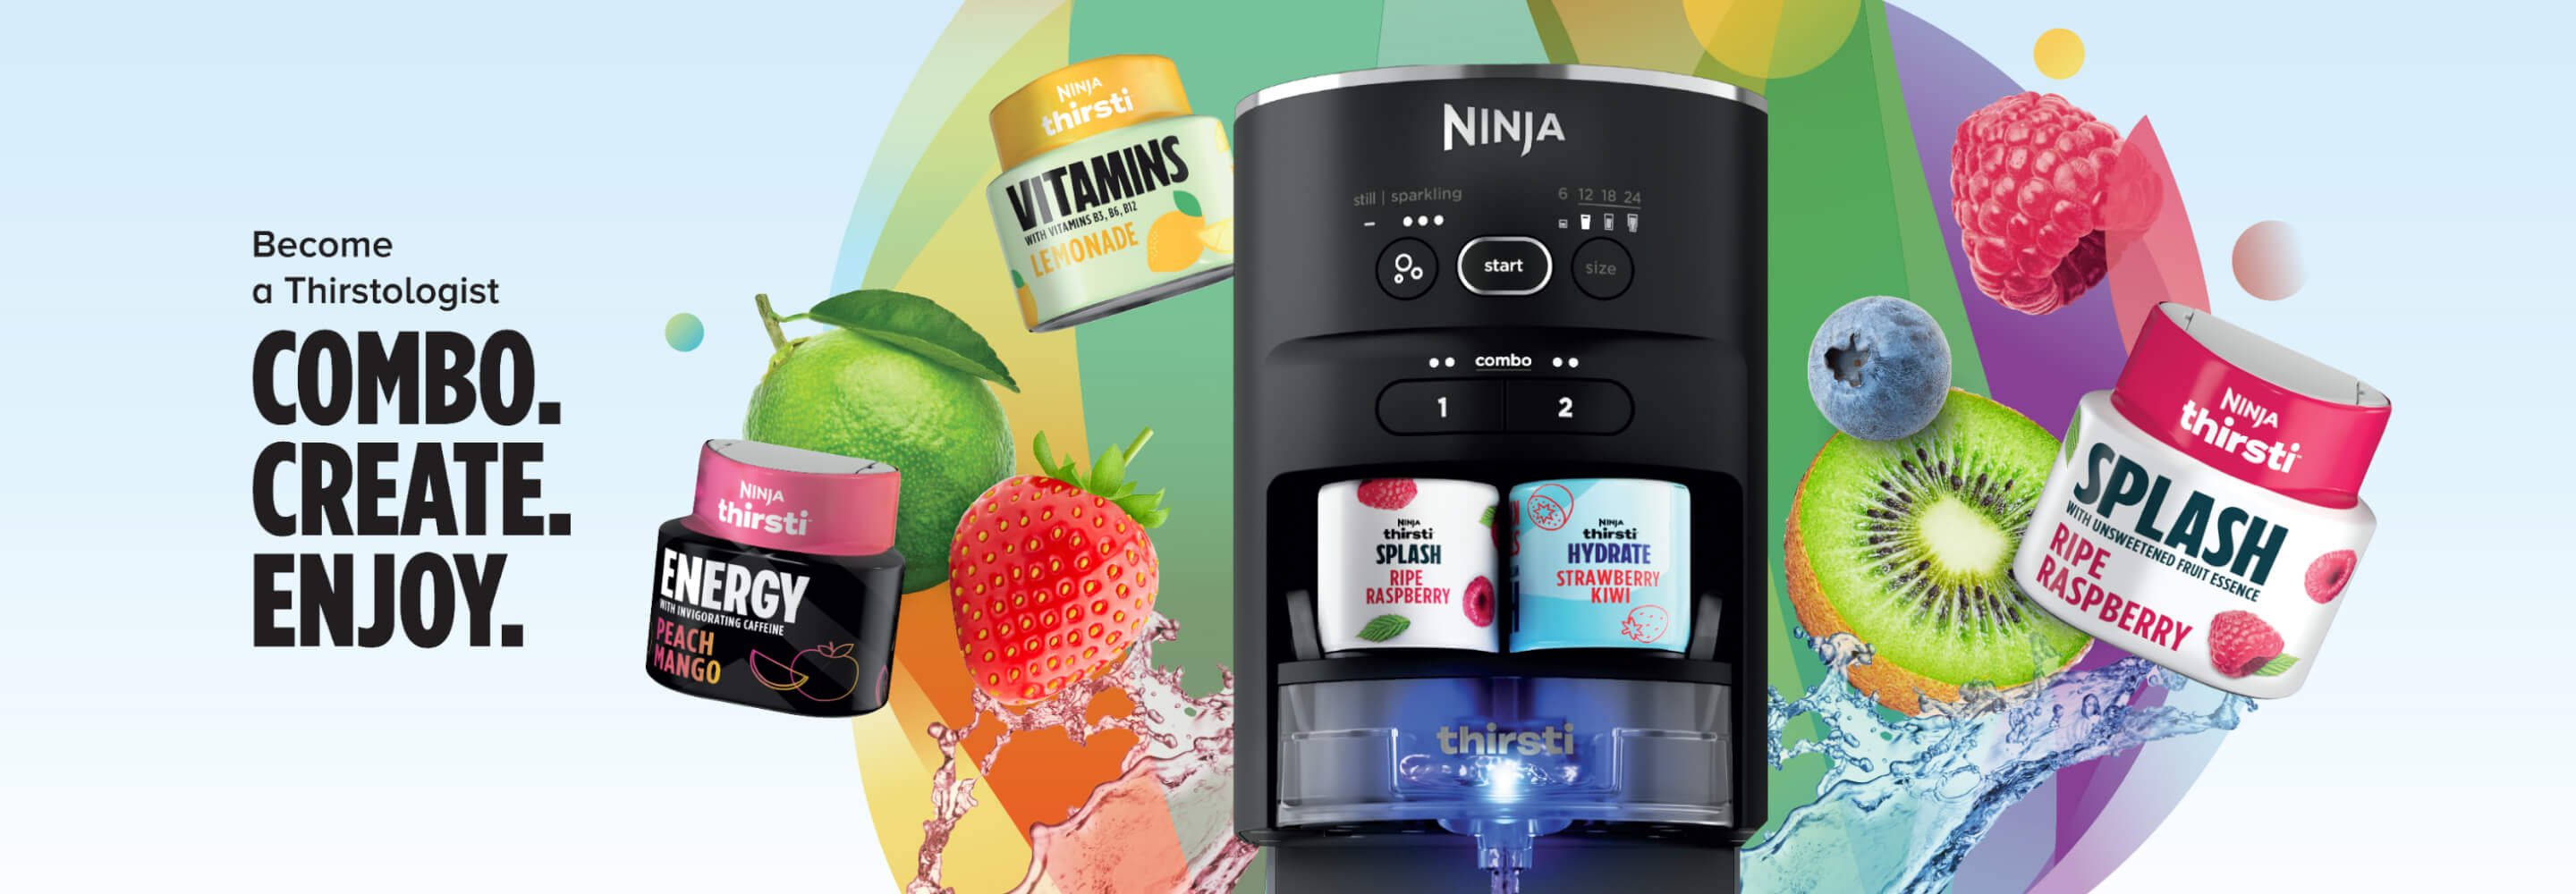 Become a Thirstologist. Combo. Create. Enjoy. Ninja Thirsti Drink System with fruit and 5 different flavors.